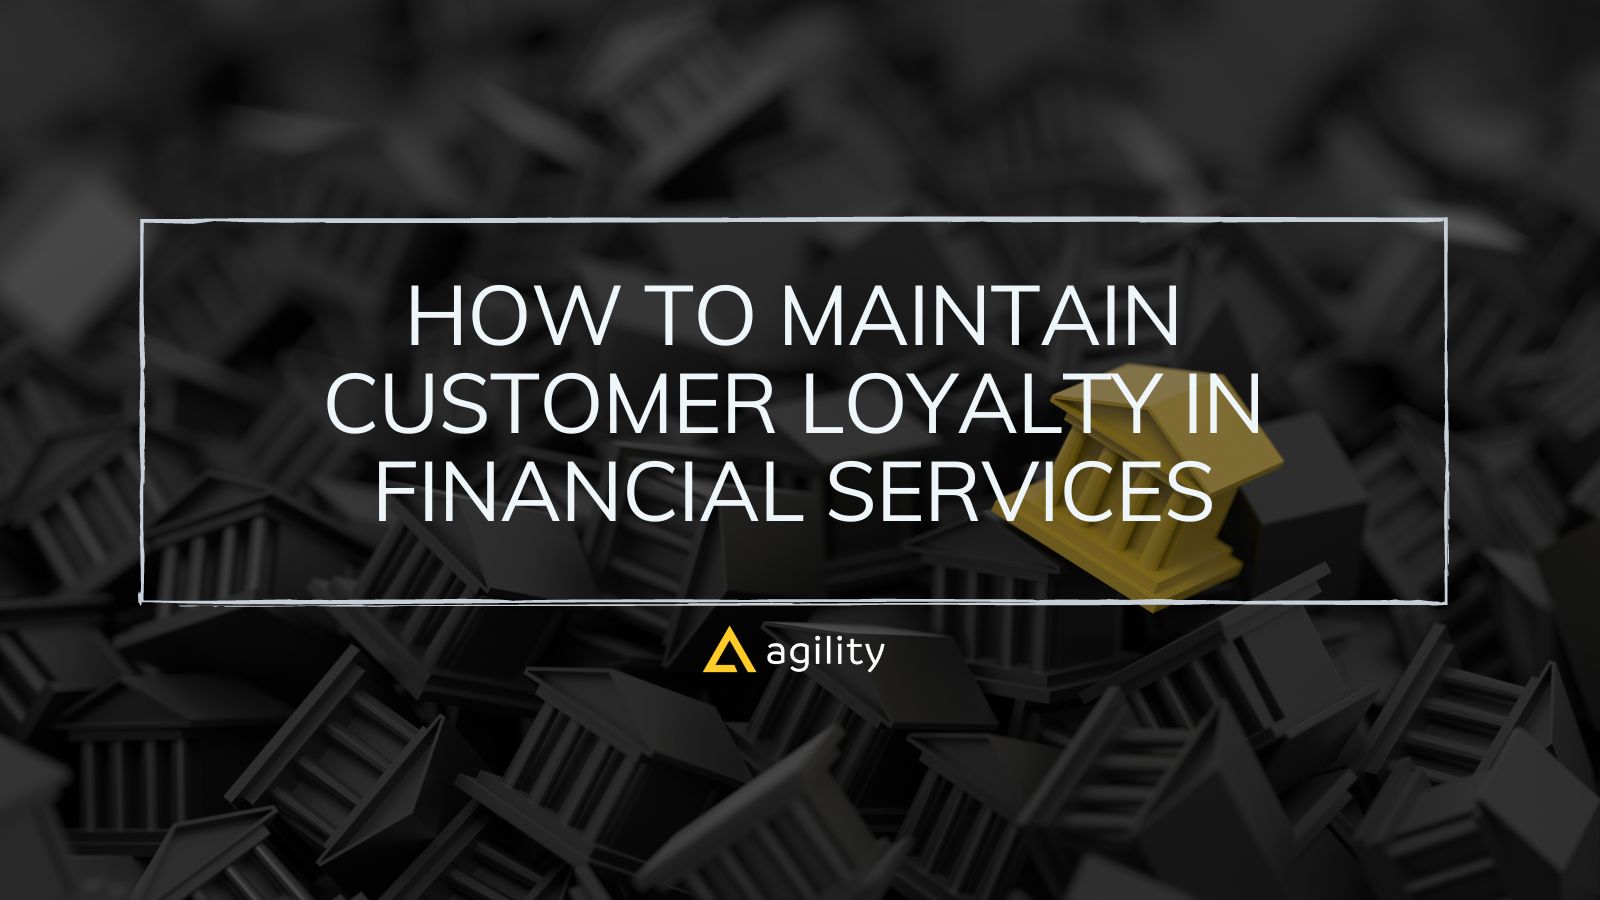 How to maintain customer loyalty in financial services